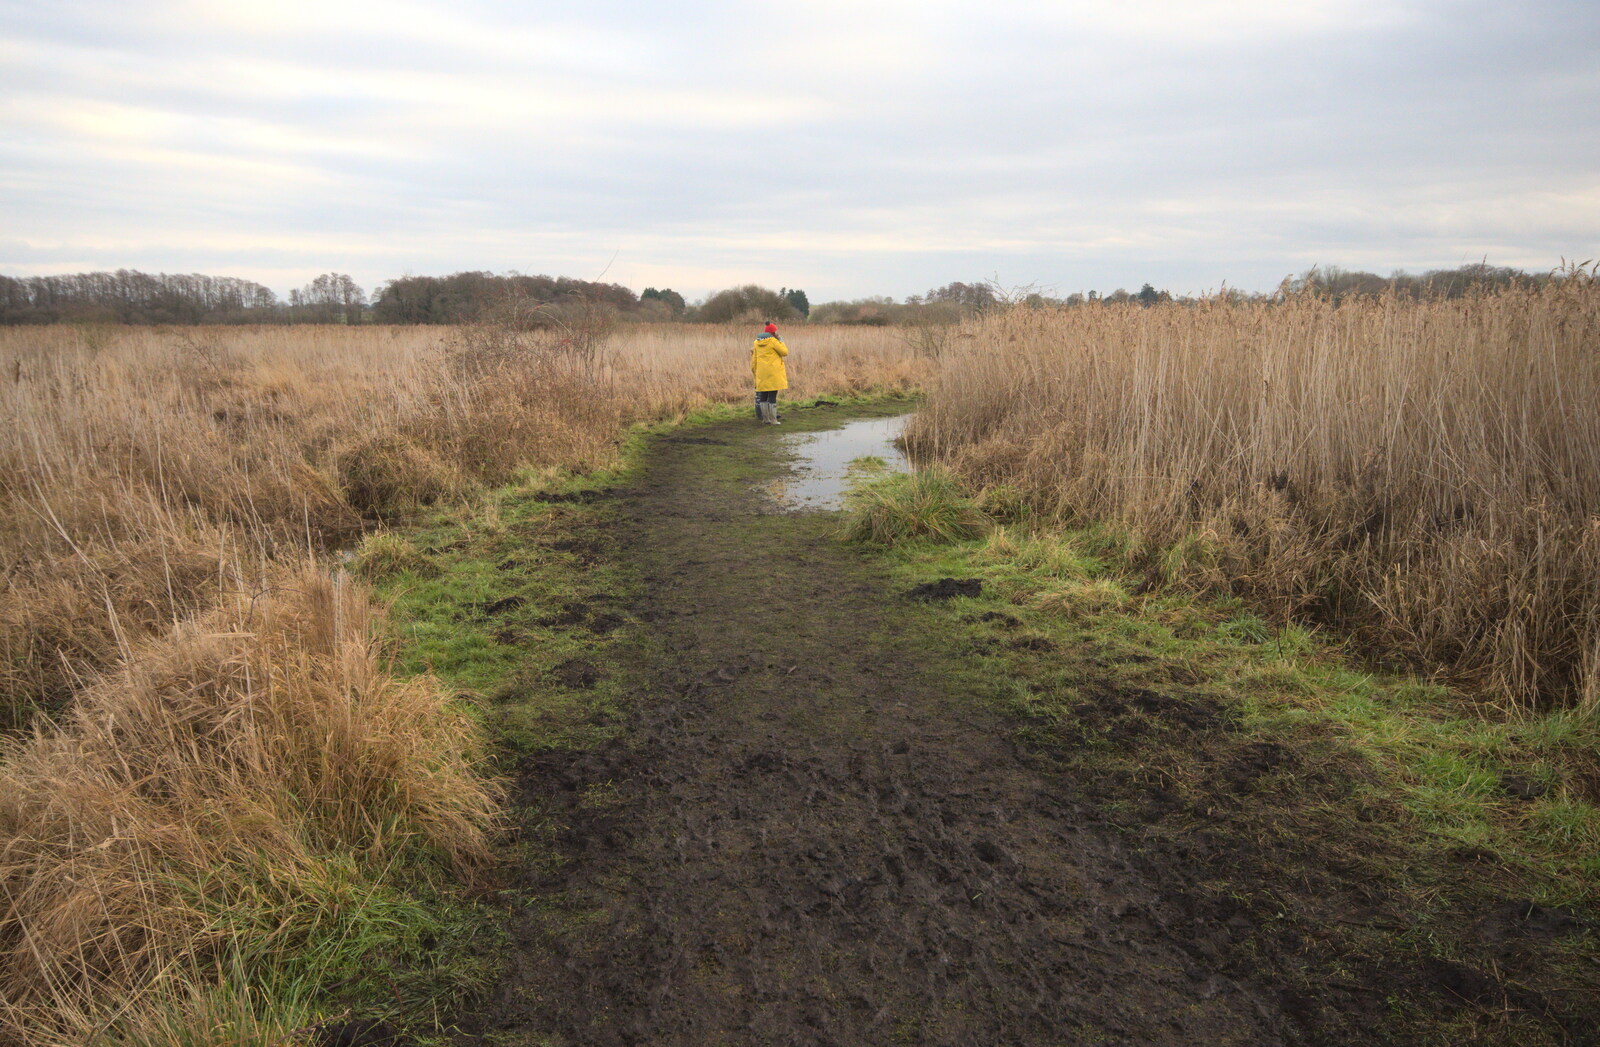 Isobel out on the watery path from A Walk Around Redgrave and Lopham Fen, Redgrave, Suffolk - 3rd January 2021